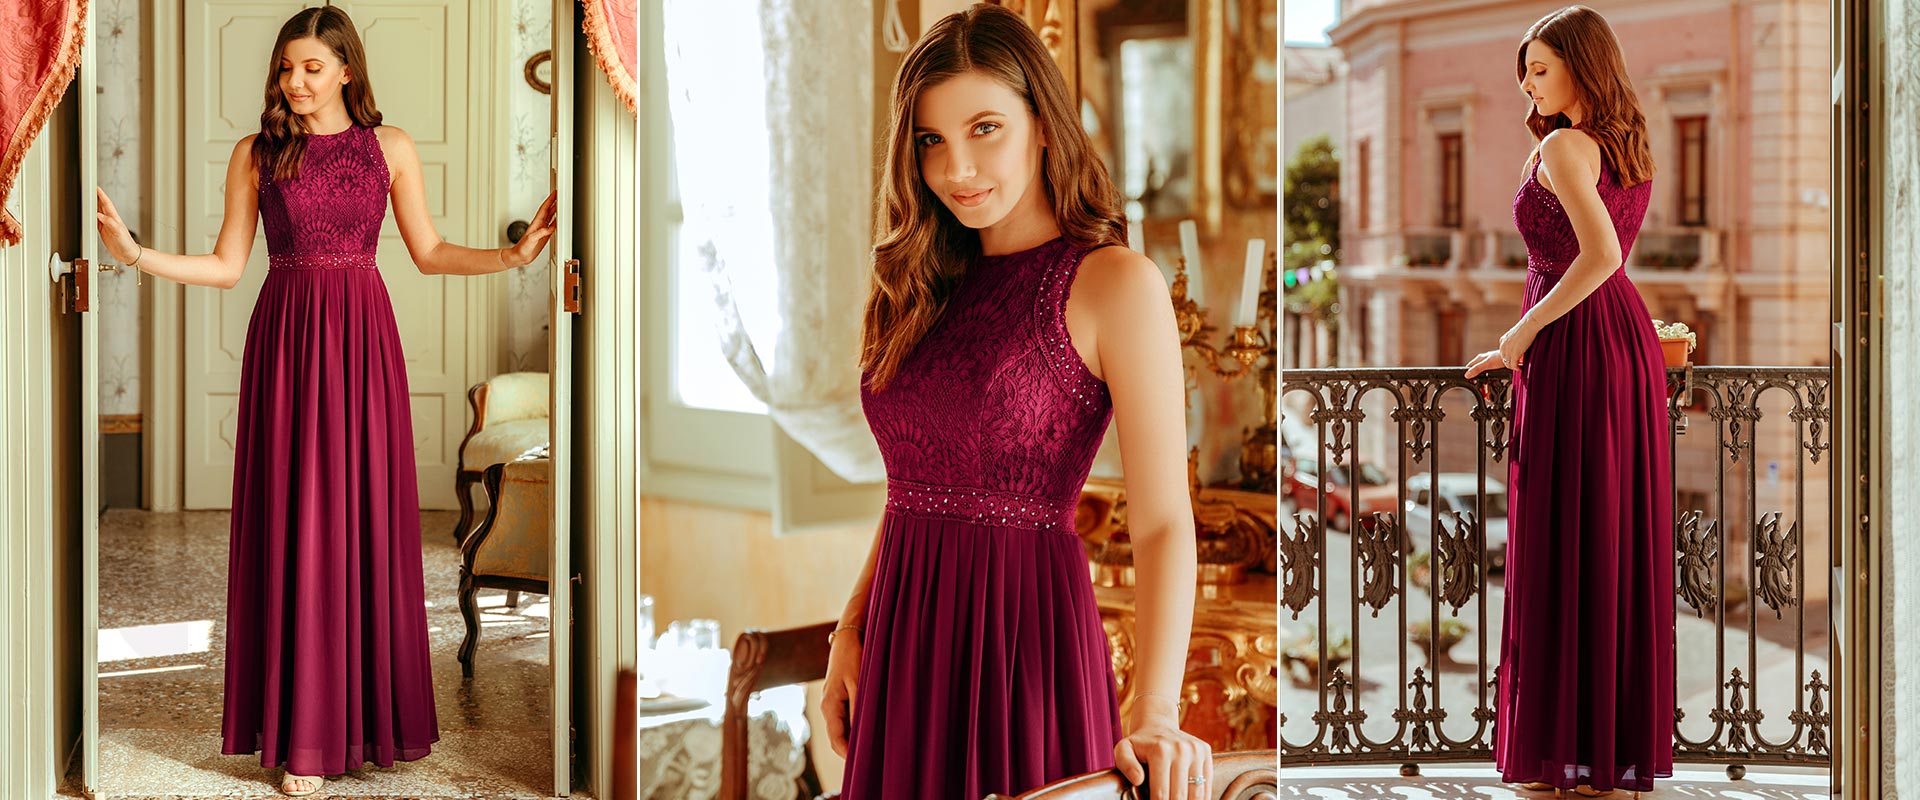 Top 5 Prom Dress Trends for 2020 to Steal the Spotlight | by Tickled Pink  Boutique | Medium